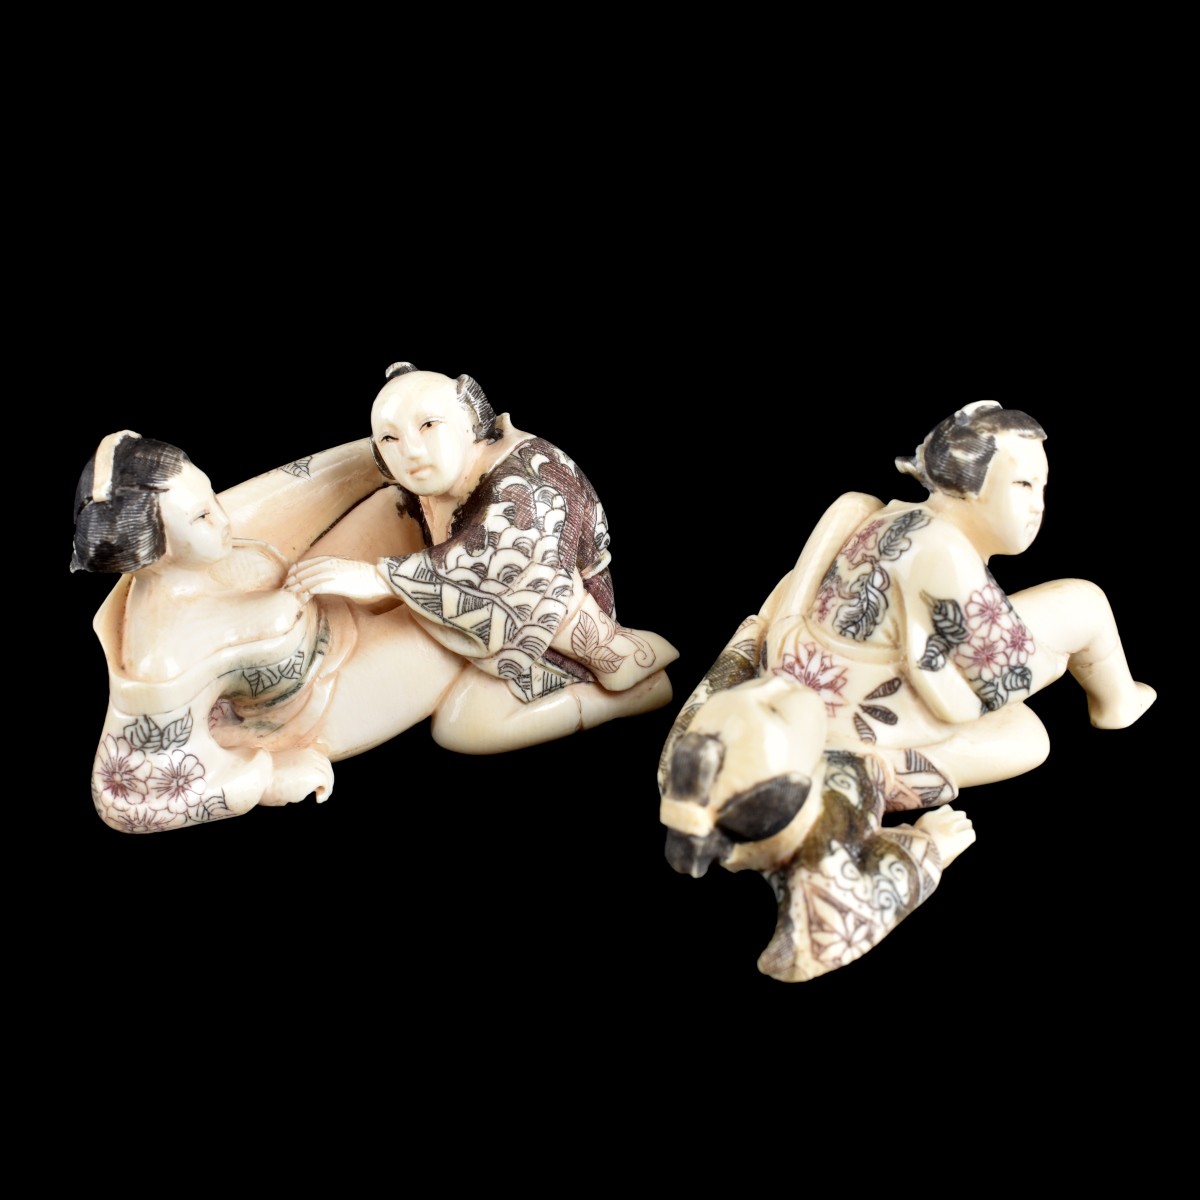 Two Mid 20C Asian Carved Ivory Erotic Figurines